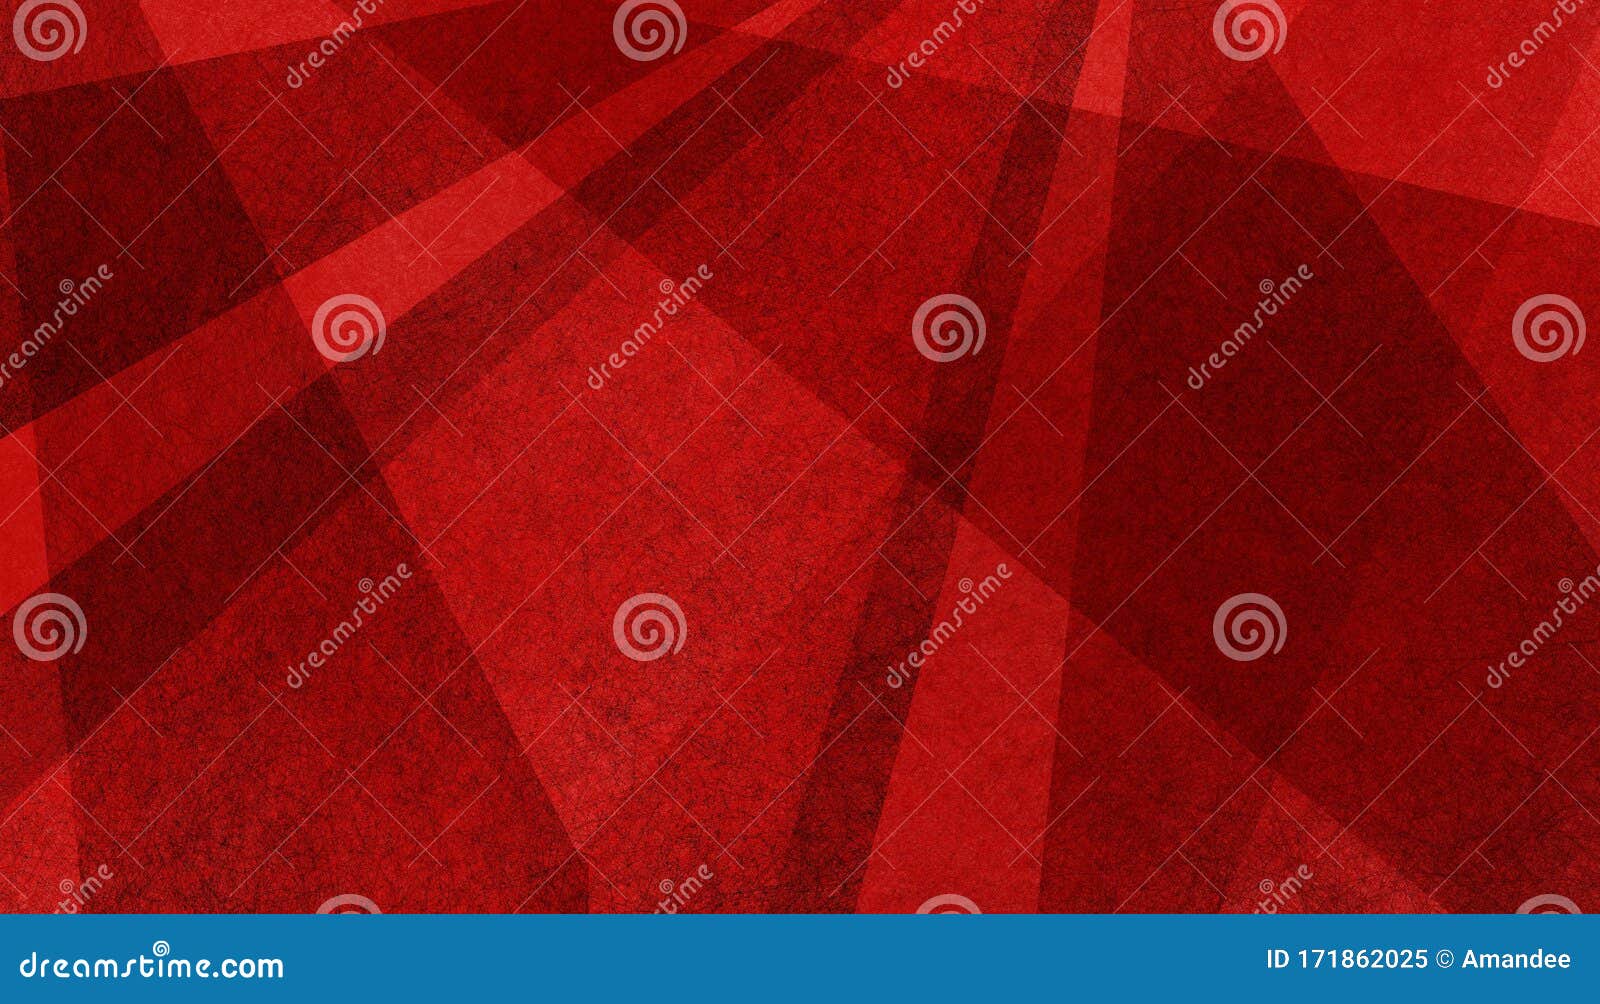 abstract red background with textured black stripes triangles and lines in modern wallpaper